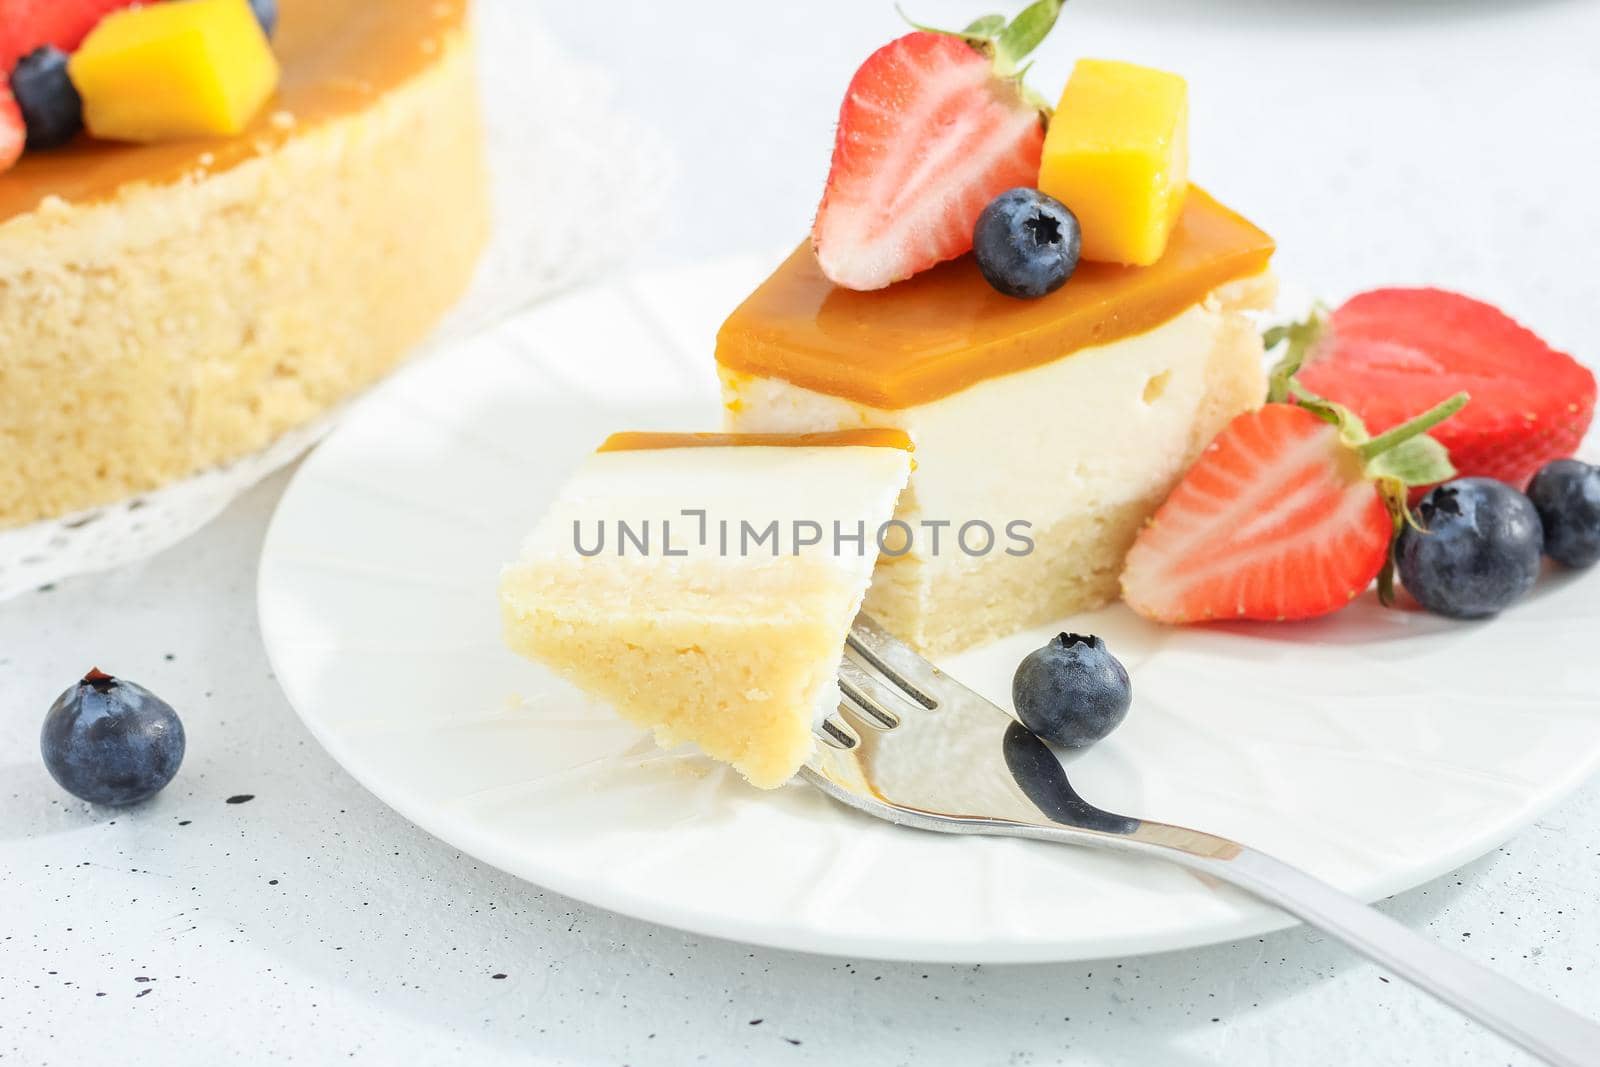 A piece of cheesecake with mango on a plate with a tea fork decorated with berries and flowers on a gray background. Healthy food.